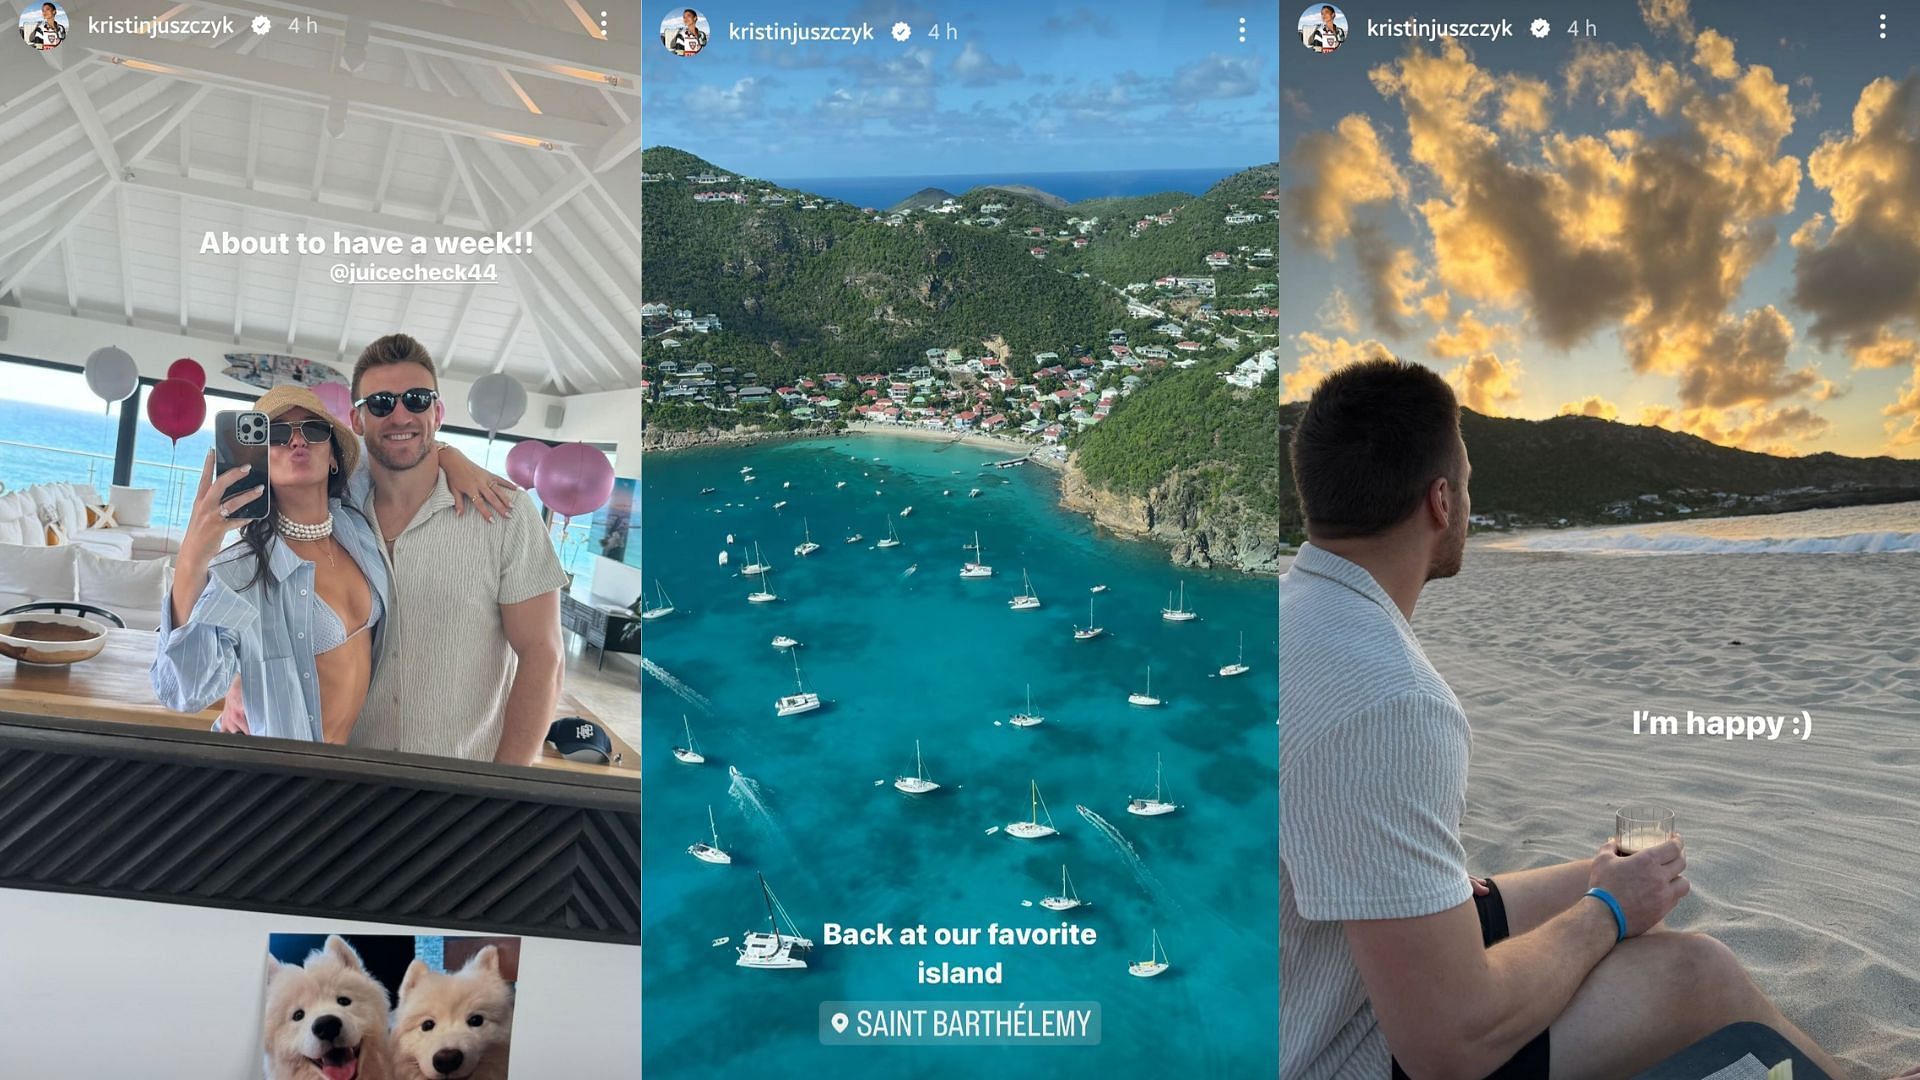 Kristin and Kyle Juszczyk went on a vacation to Saint Barthelemy Island